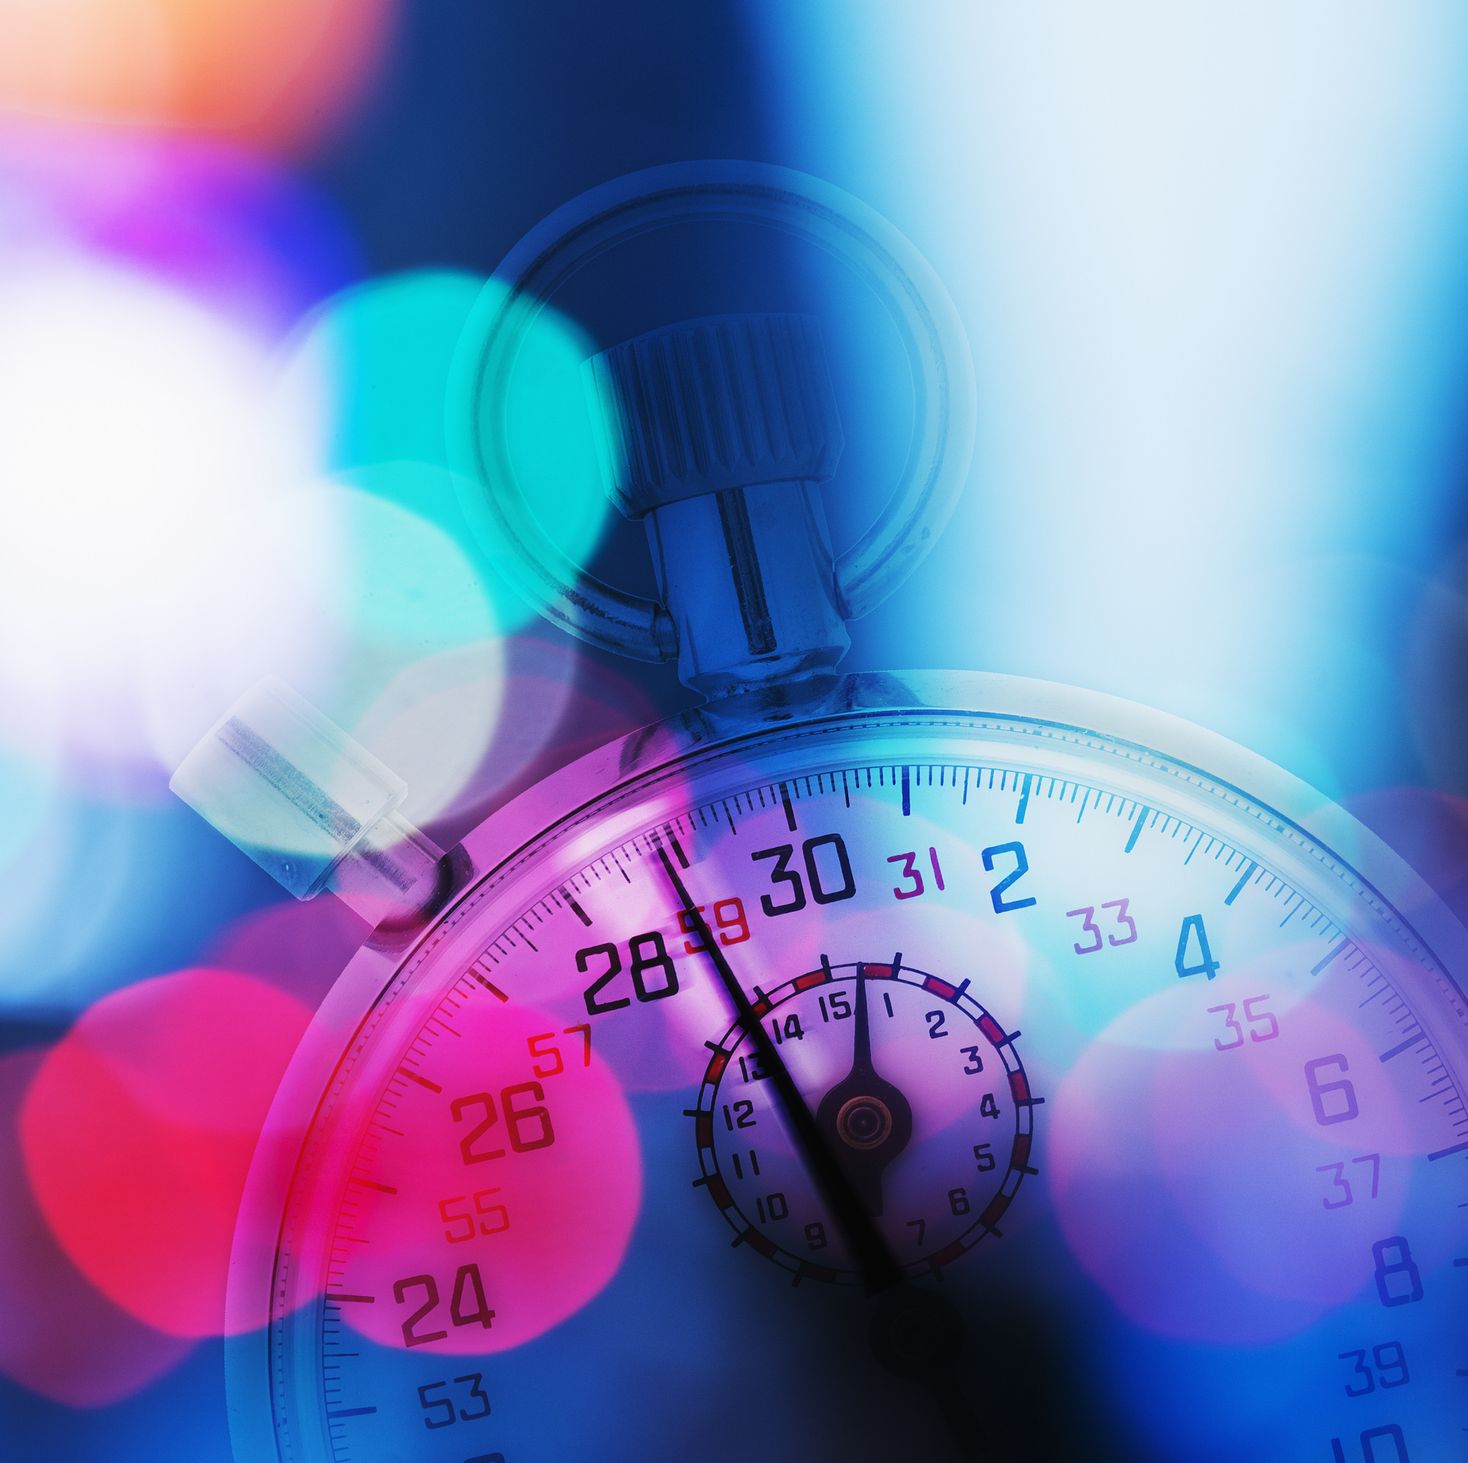 Say Goodbye to the Extremely Chaotic 'Leap Second' for Good in 2035